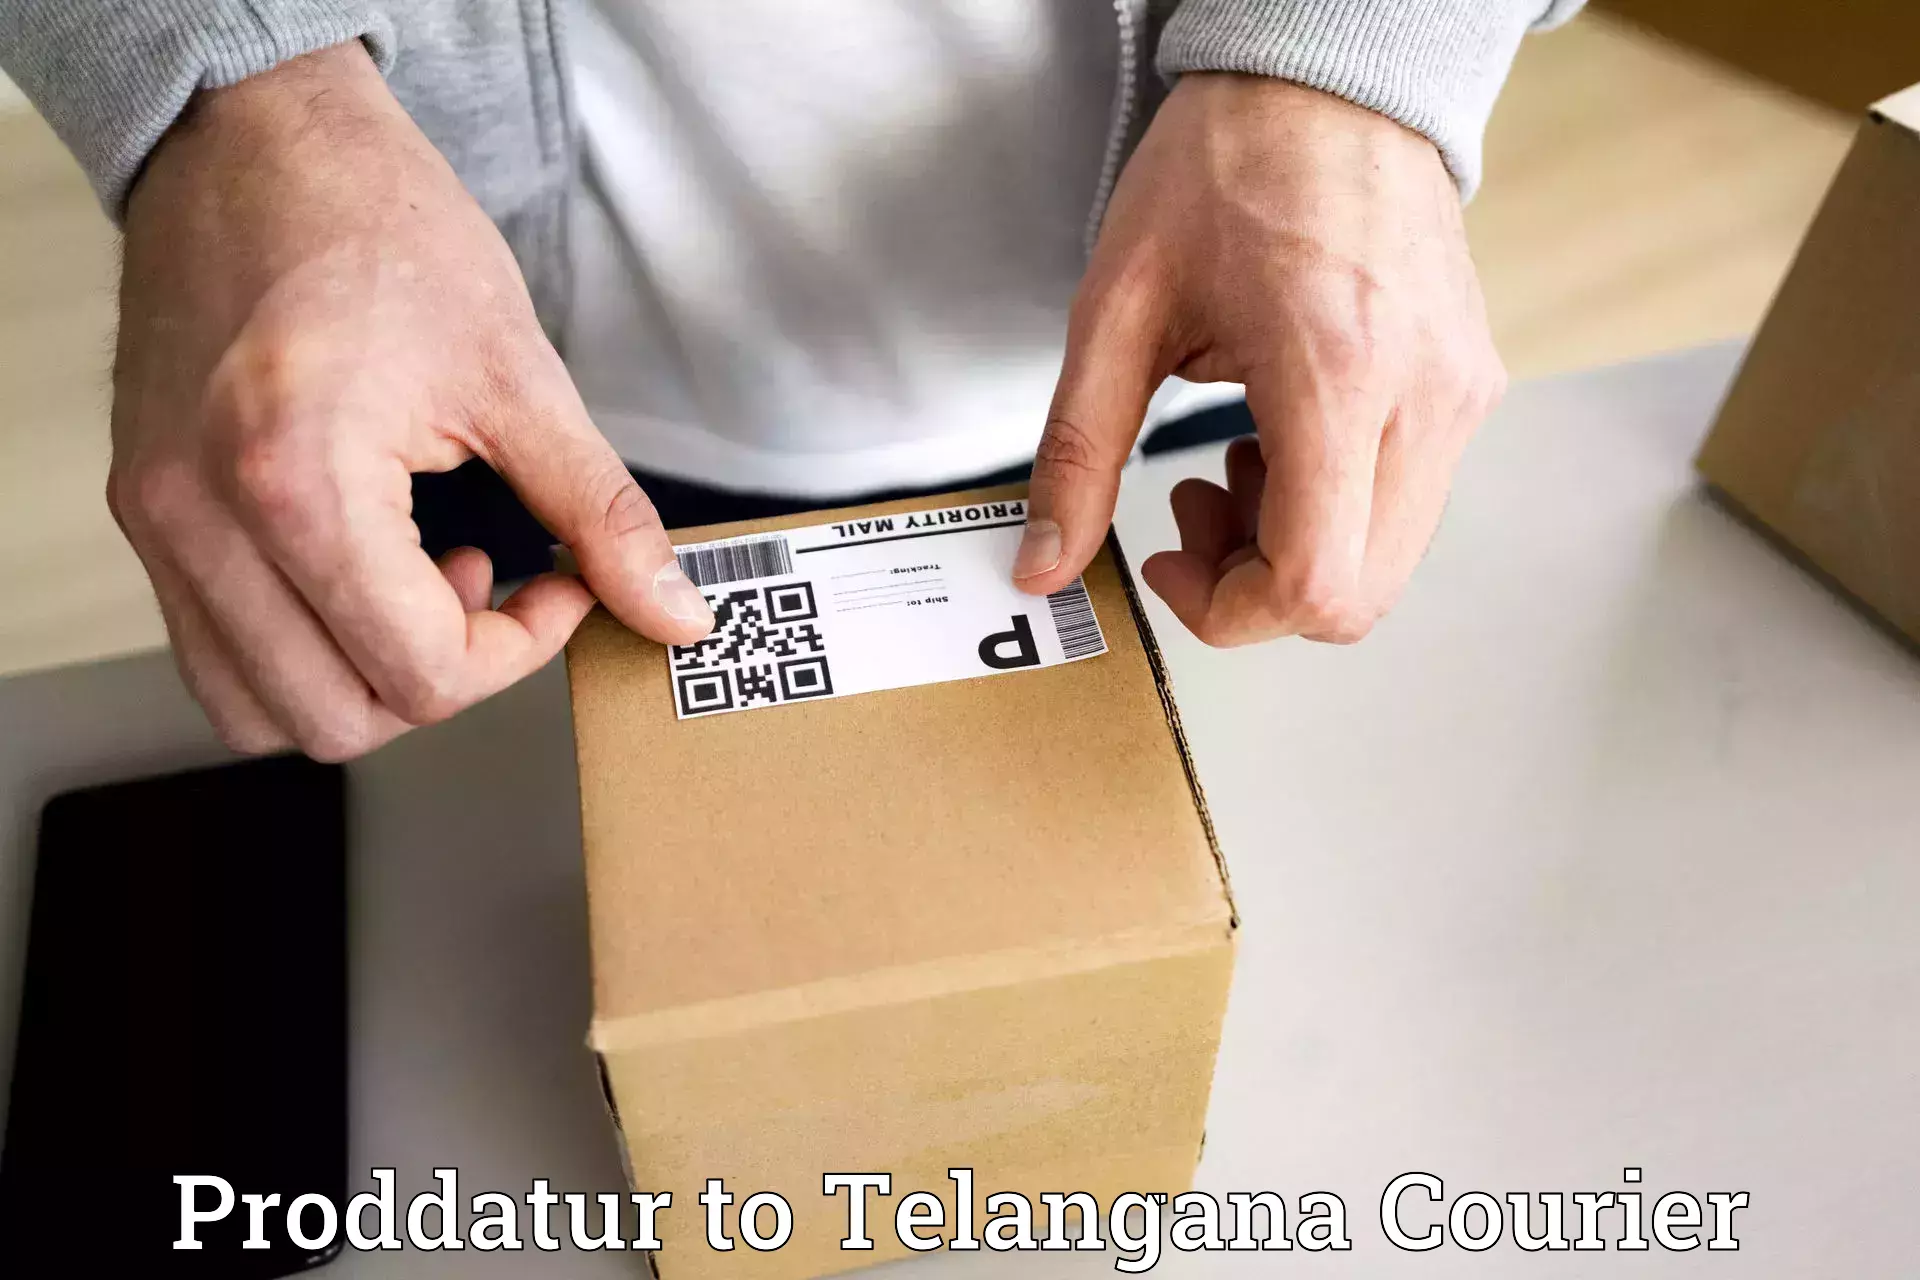 Efficient courier operations Proddatur to Ghanpur